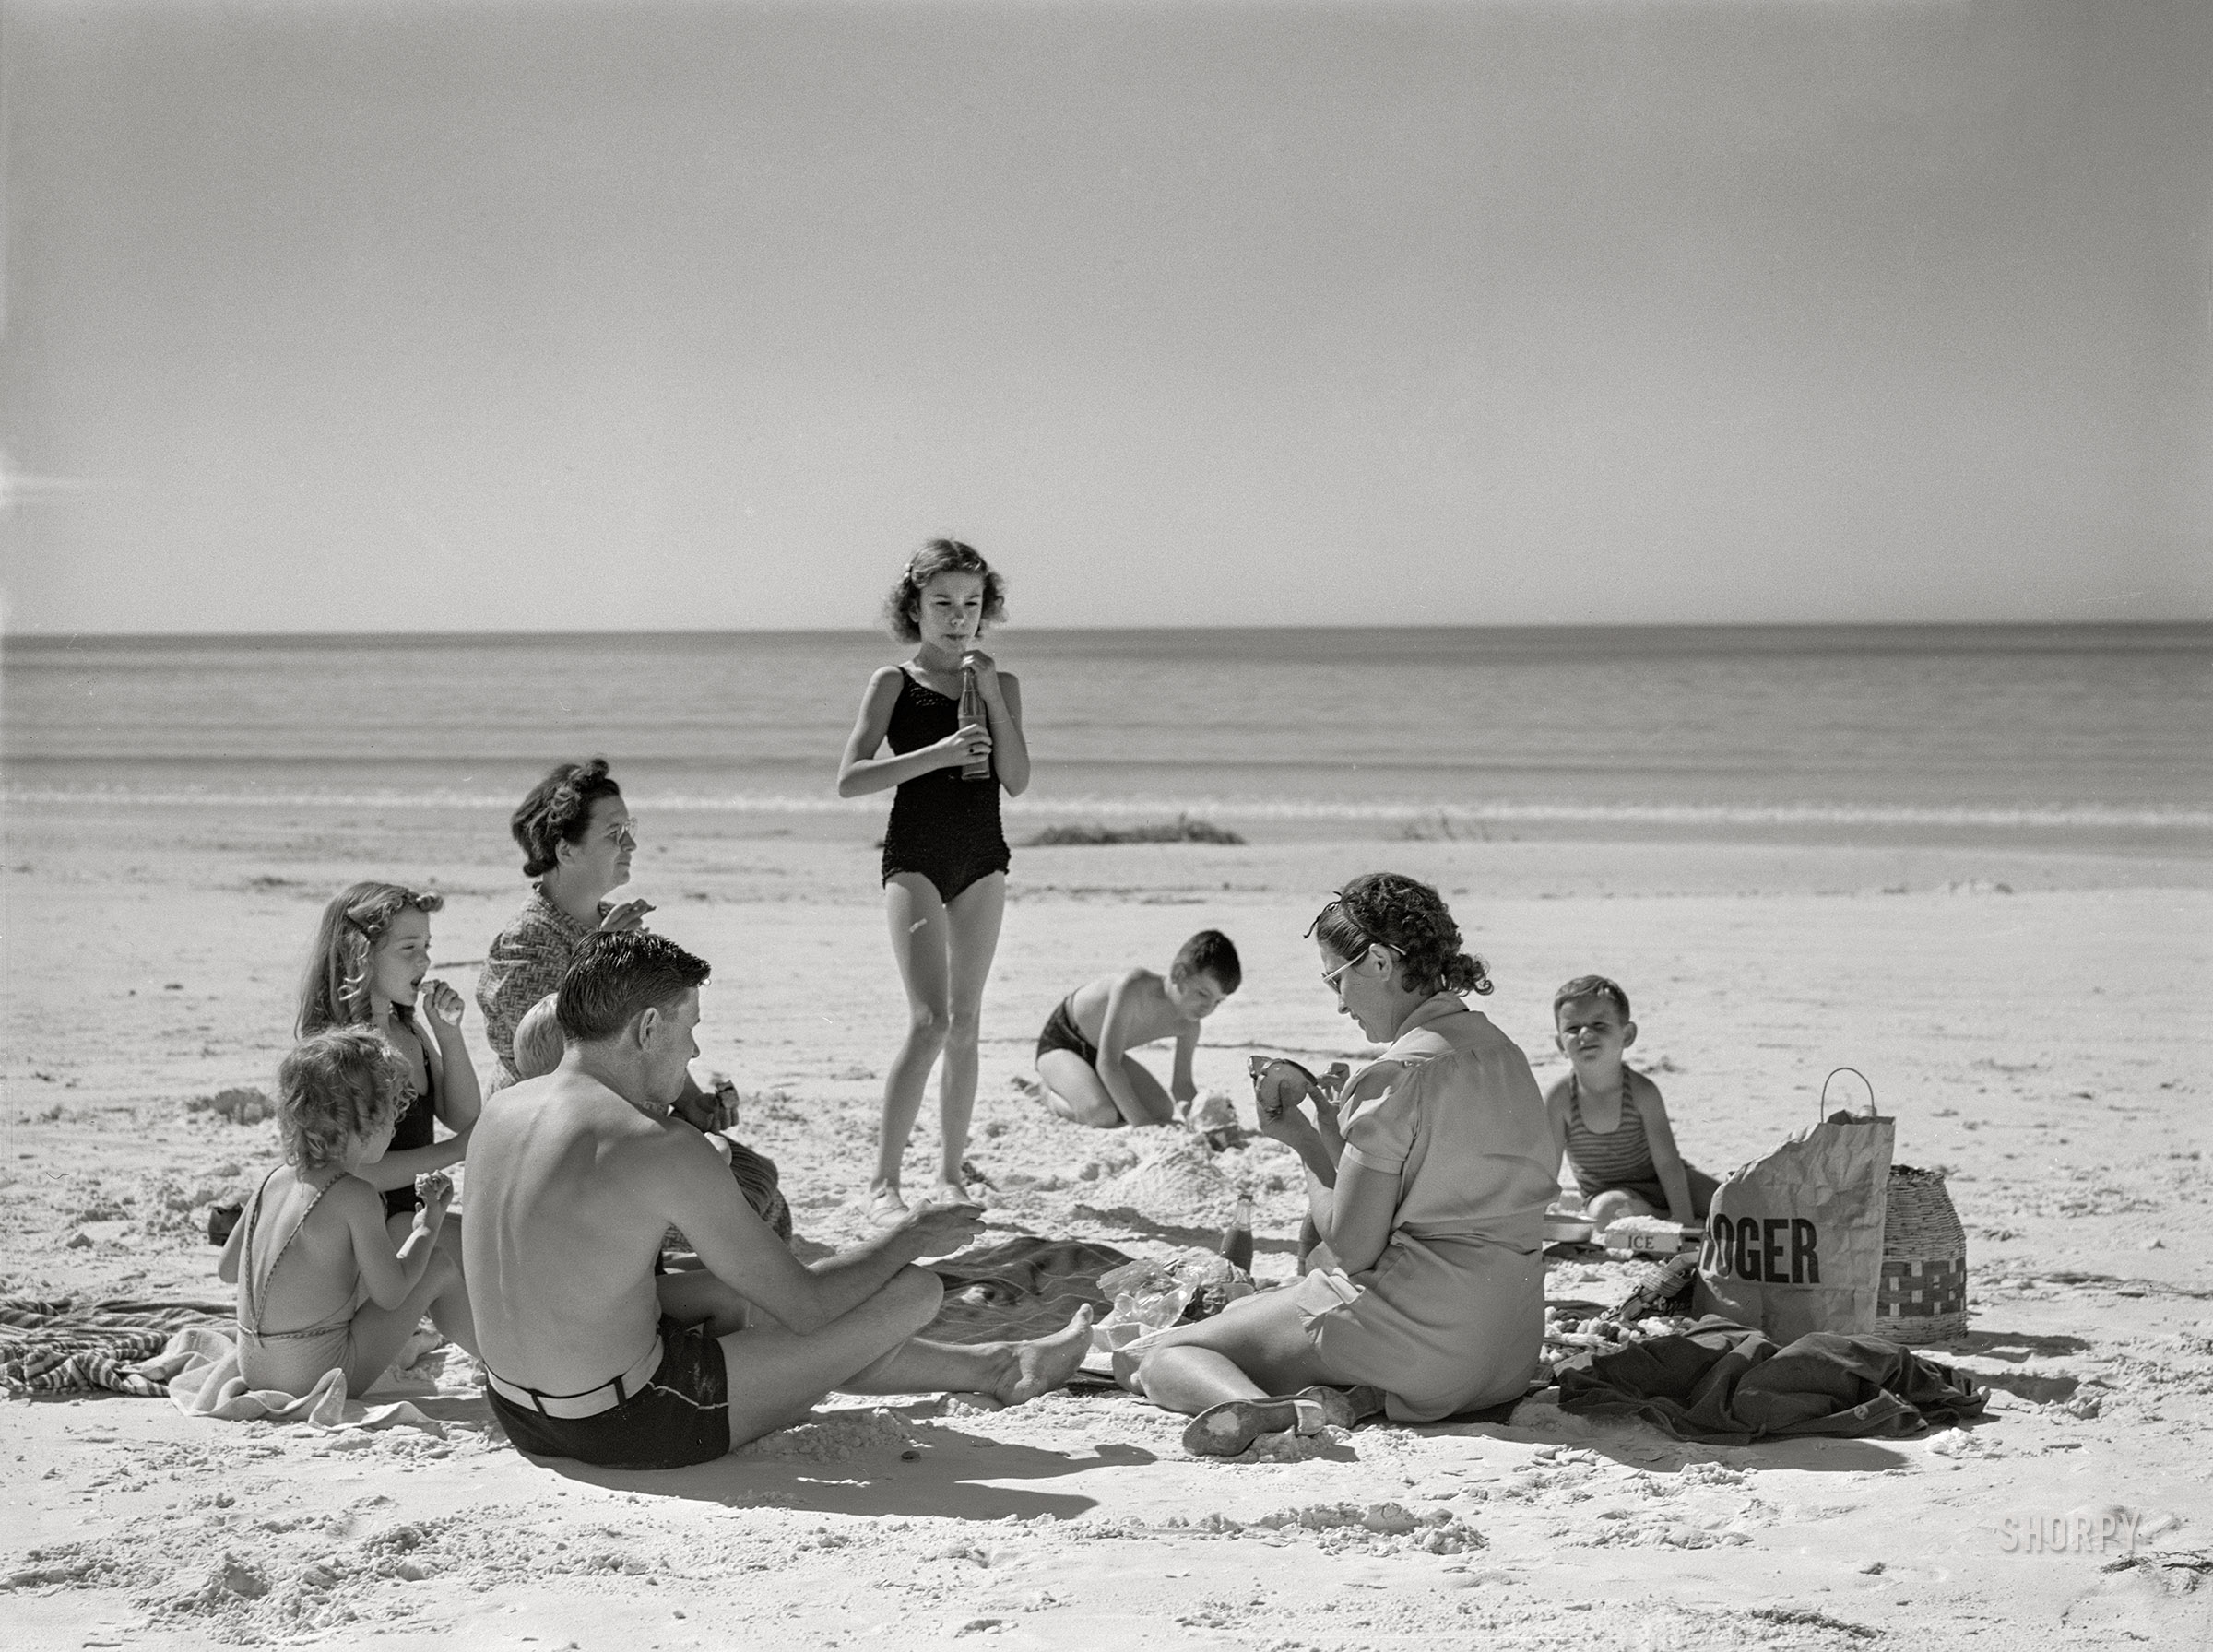 January 1941. "Guests of Sarasota trailer park picnicking at the beach." Medium format acetate negative by Marion Post Wolcott for the Farm Security Administration. View full size.